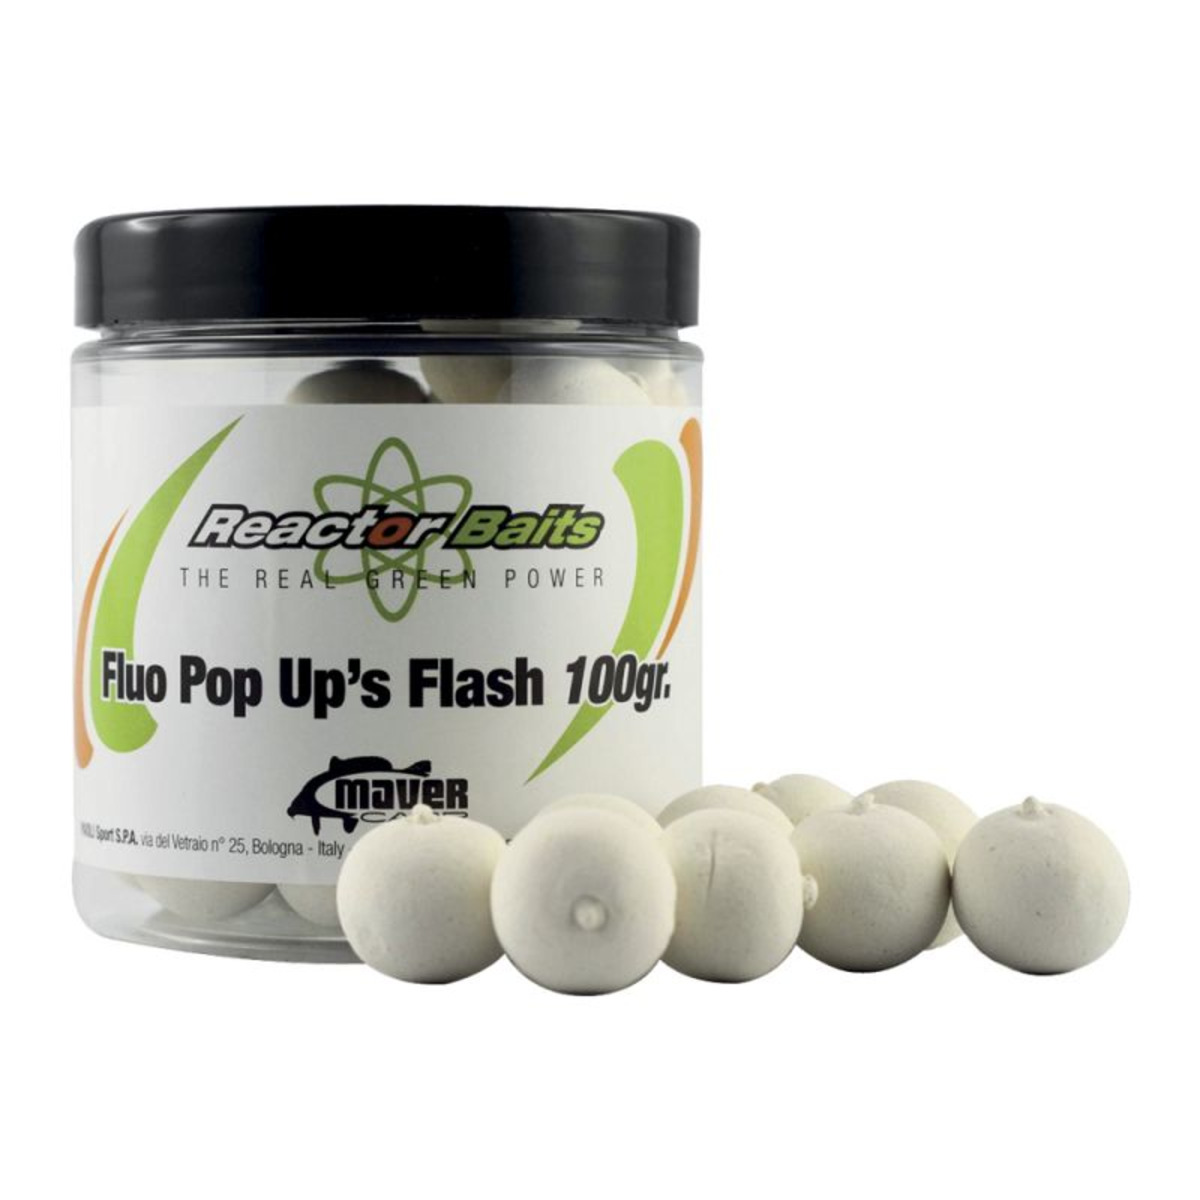 Reactor Baits Pop Up Flash Fluo Neutral Flavour - White Fluo - 20 mm